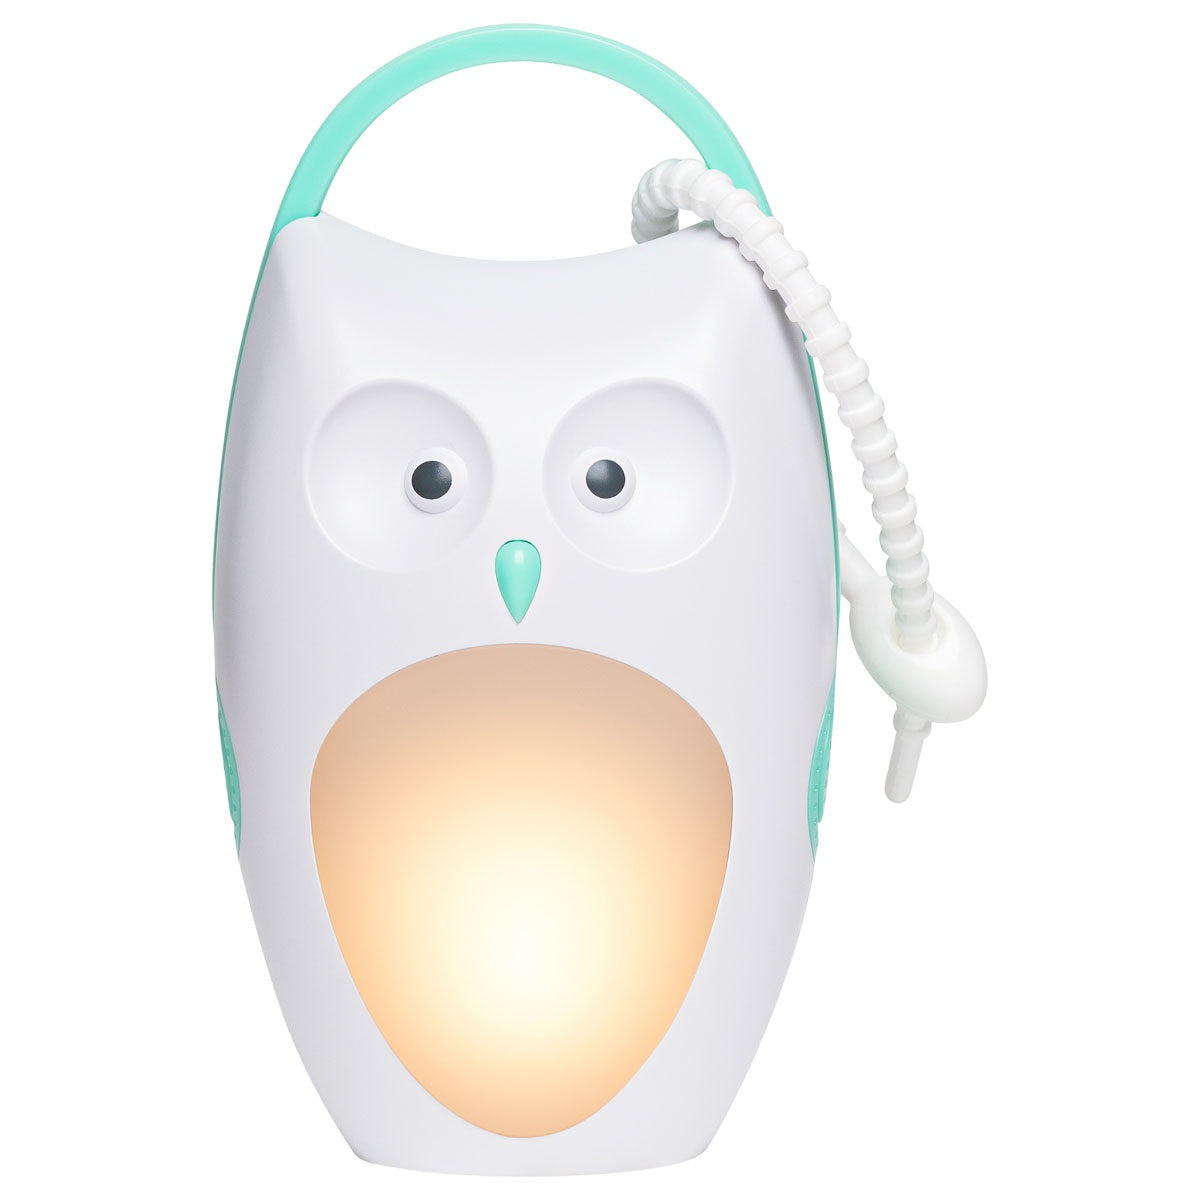 Oricom OLS50 Sound Soother with Night Light